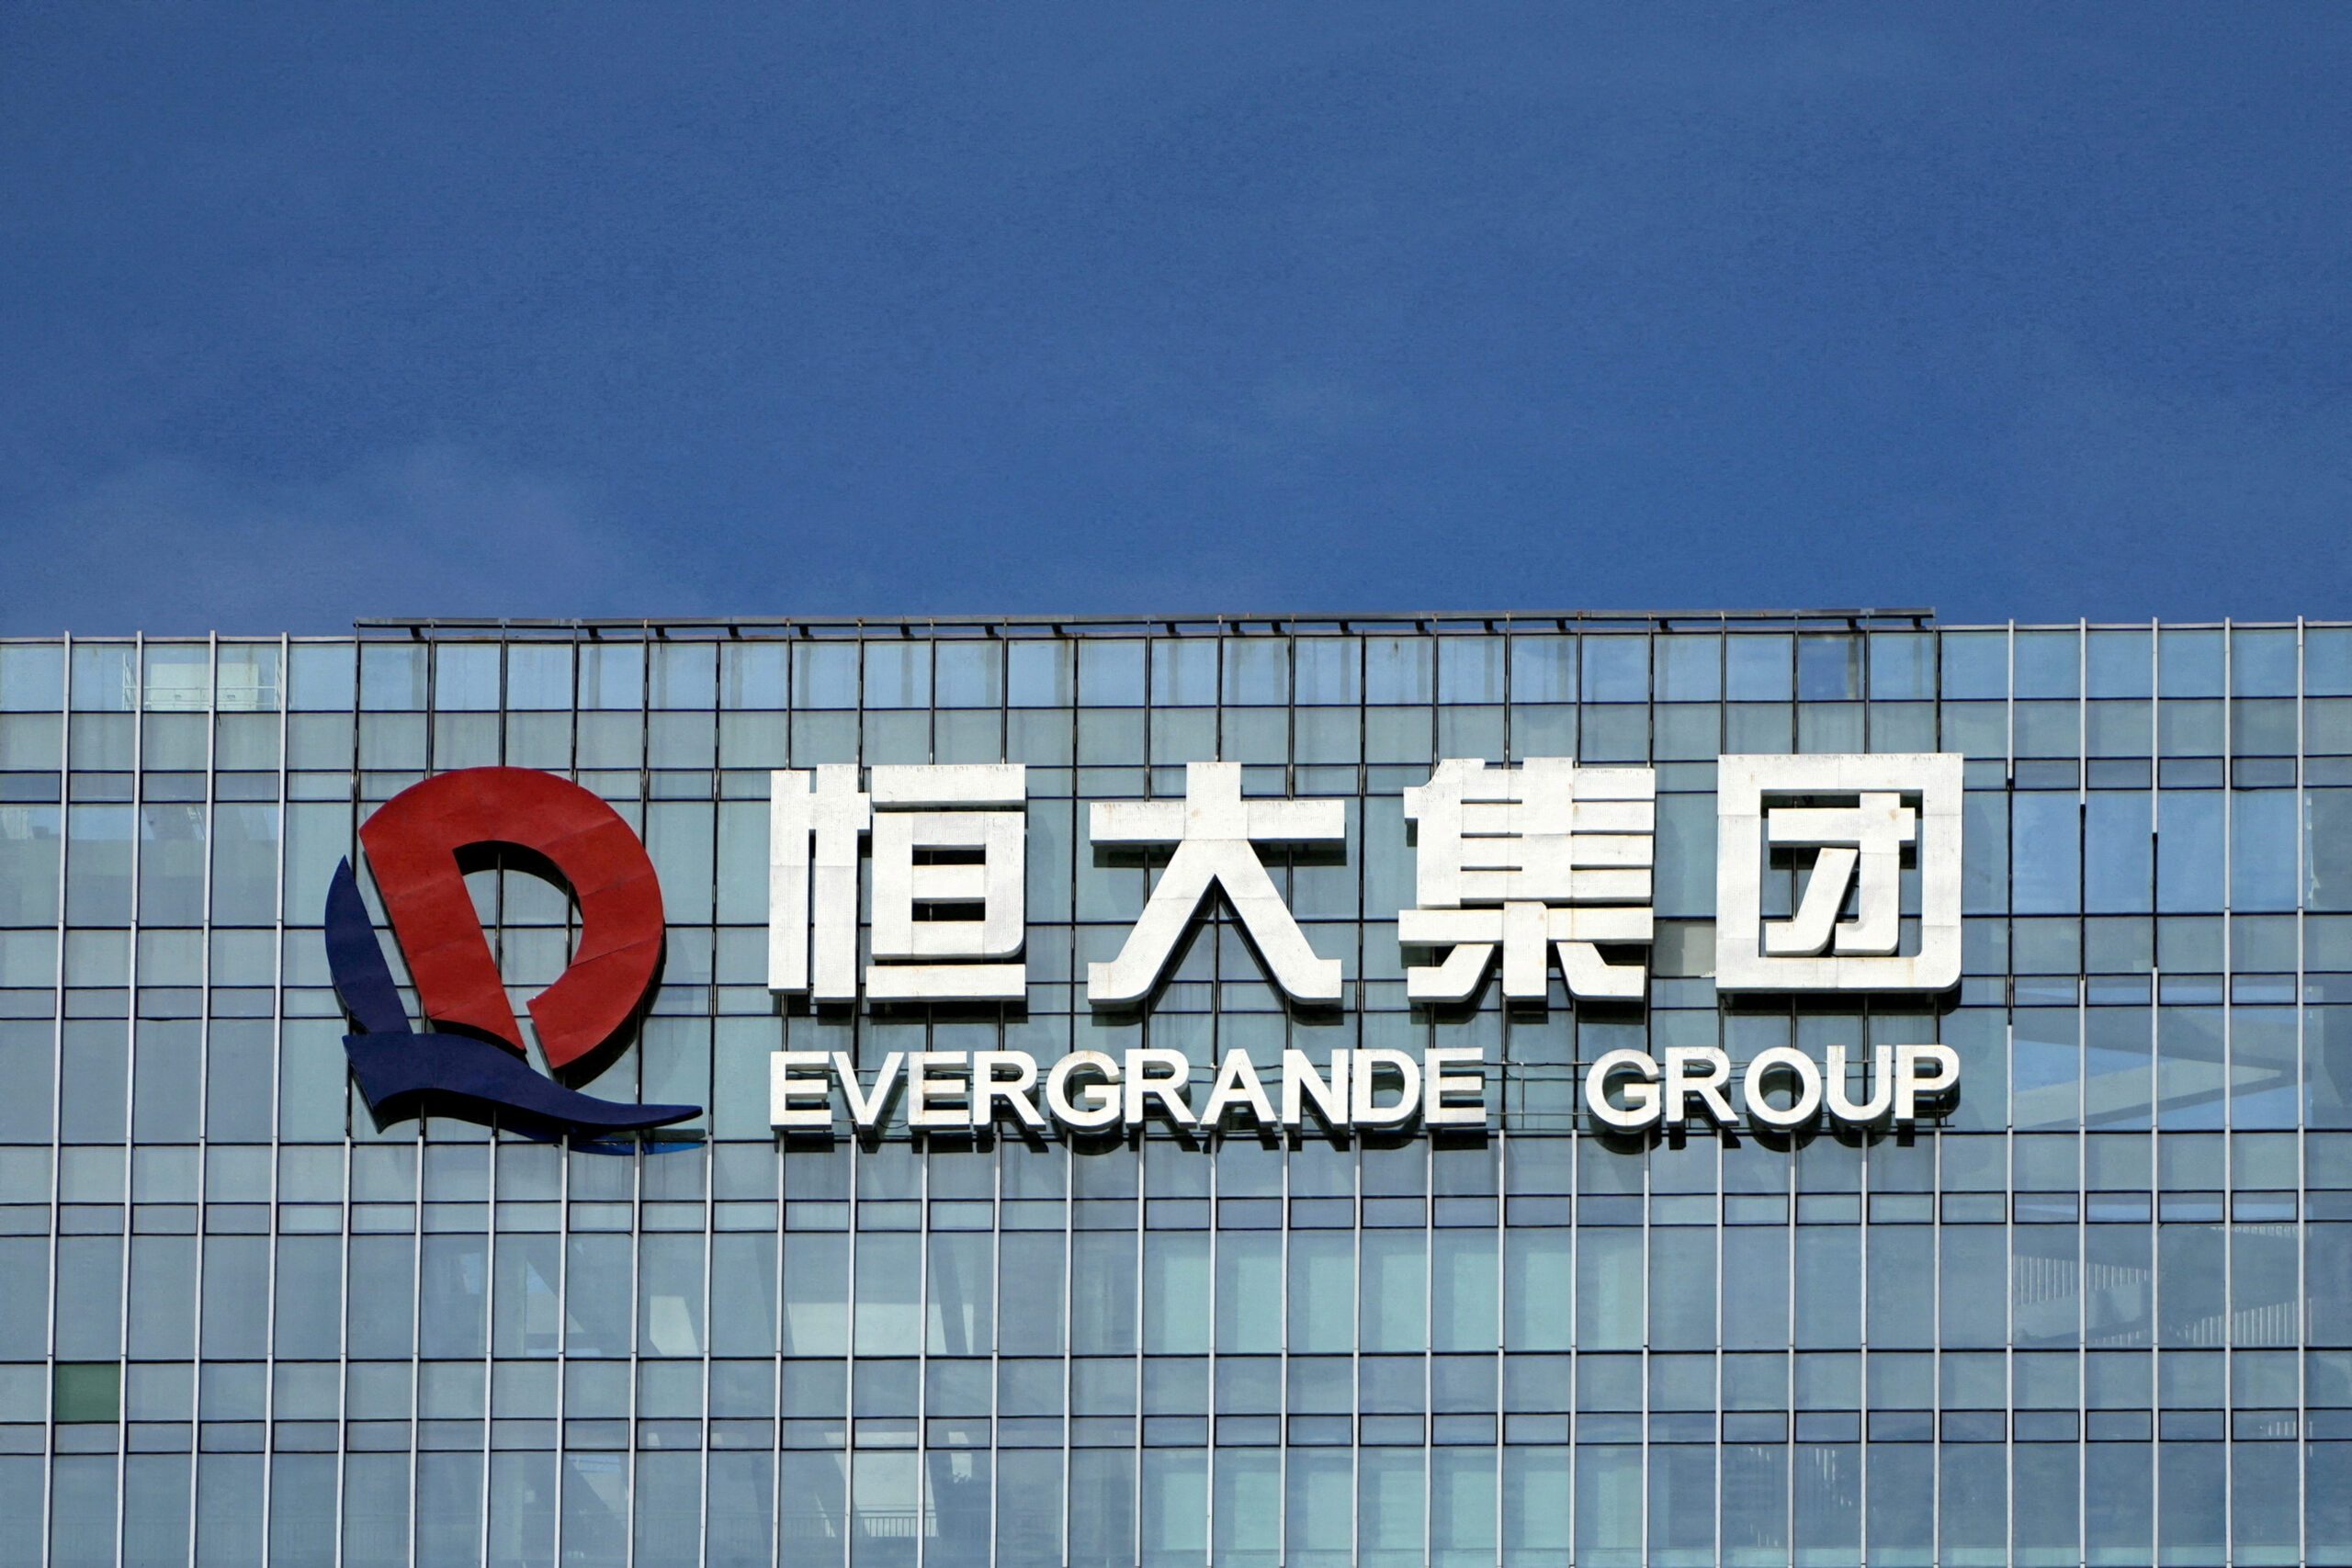 Evergrande proposes offshore creditors get 30% equity stake in subsidiaries